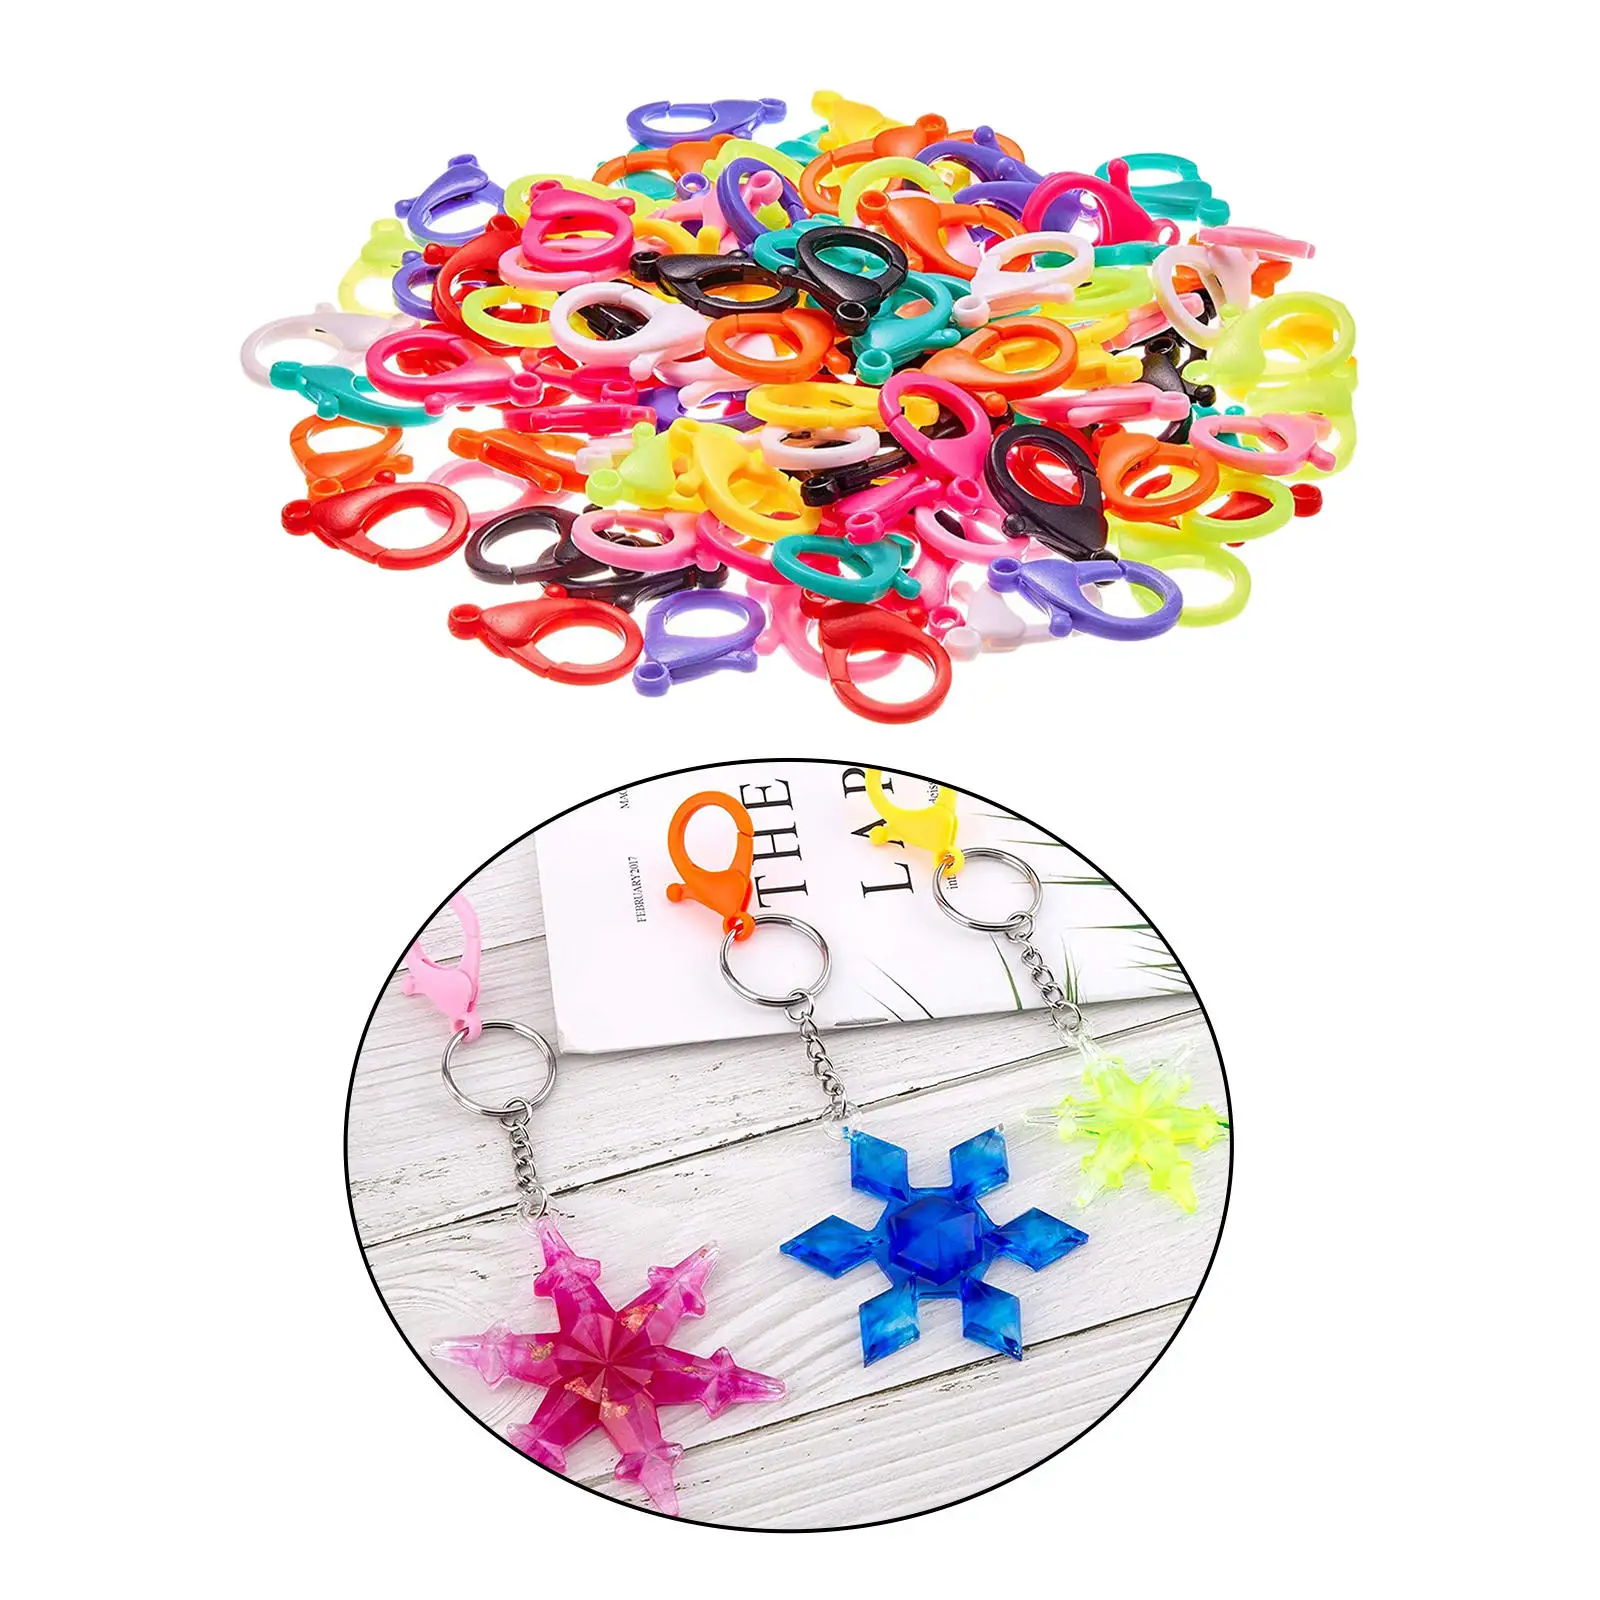 100 Pcs Carabiners with Carabiner Snap Hooks for Keychain Bags Candy Colorful Acrylic Lobster Clasps Hooks Key Chain Key Rings